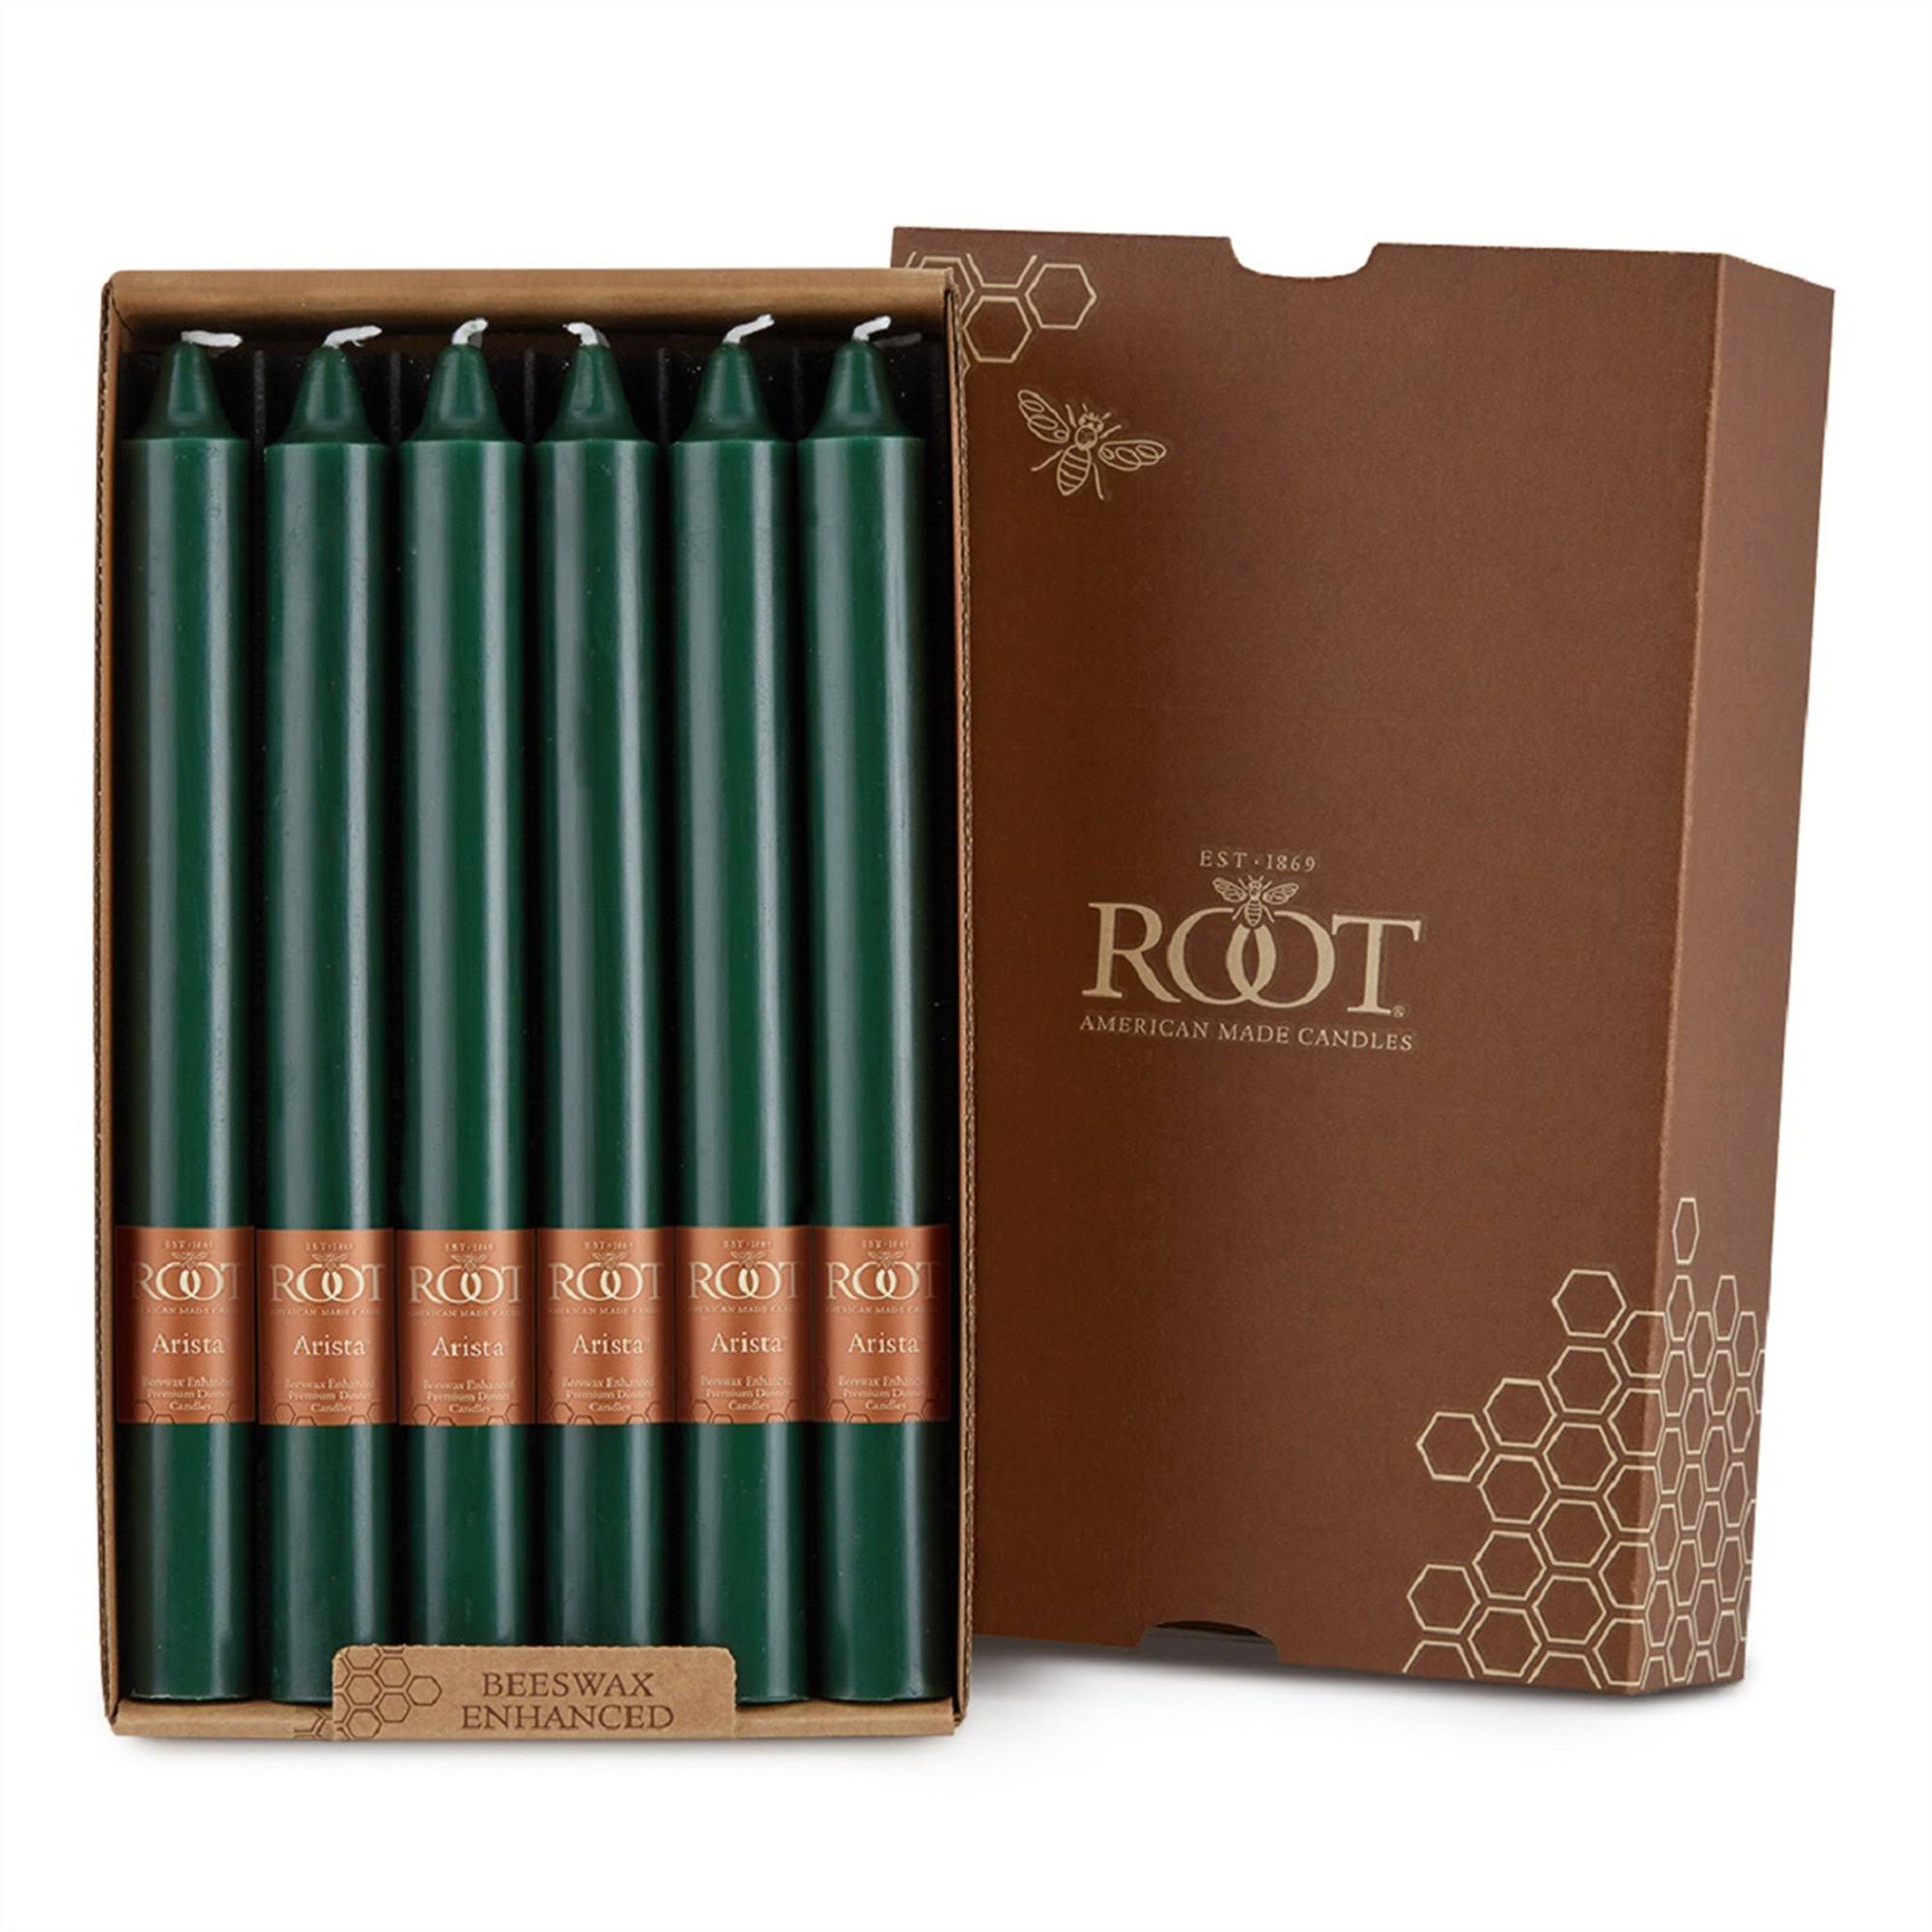 ROOT 9 inch Unscented Smooth Arista Taper Candles box of 12 - Dark Green - 9 x 7/8